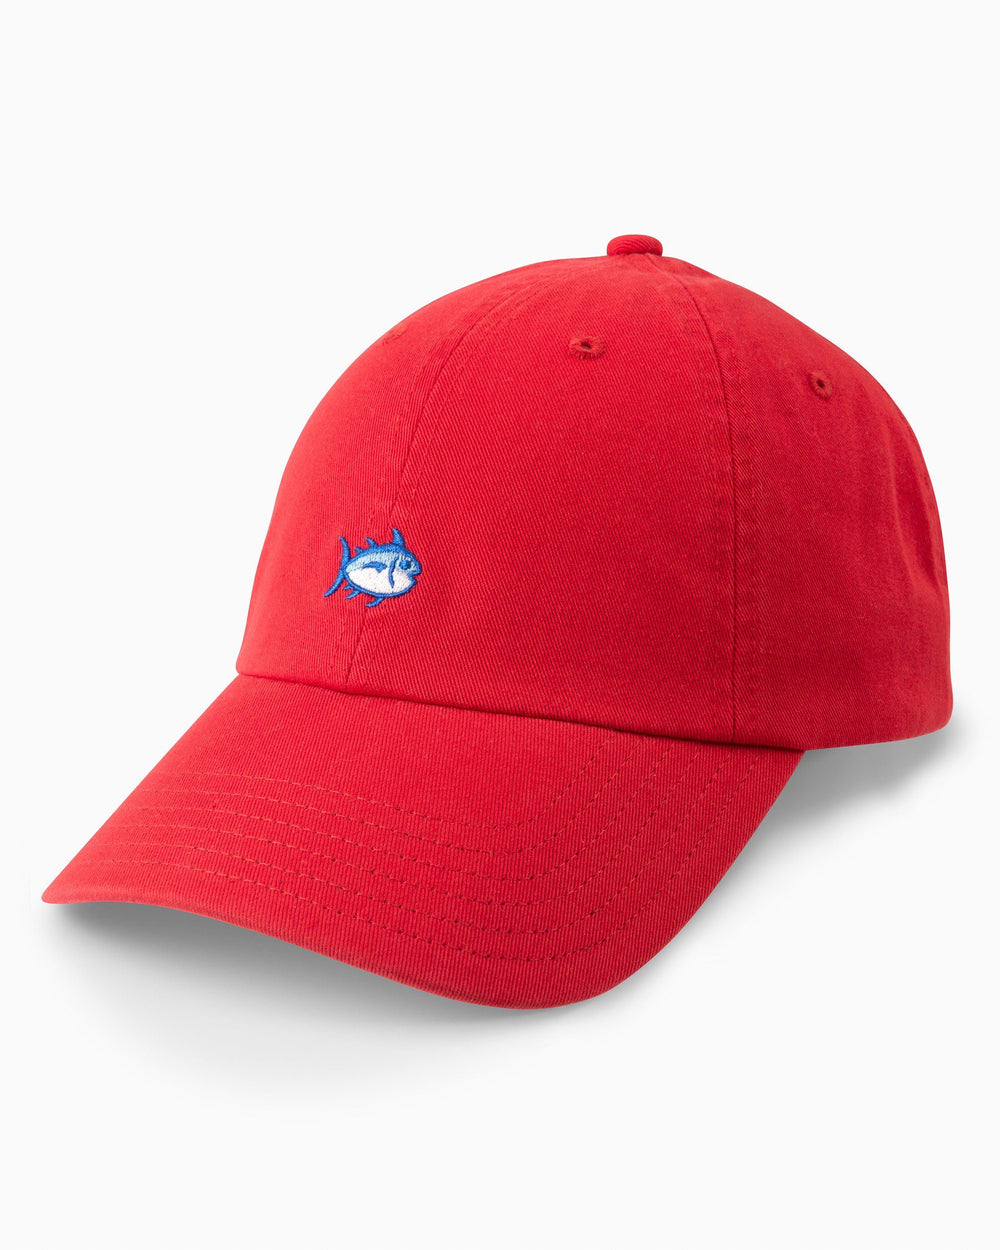 The front of the Skipjack Hat by Southern Tide - Roman Red